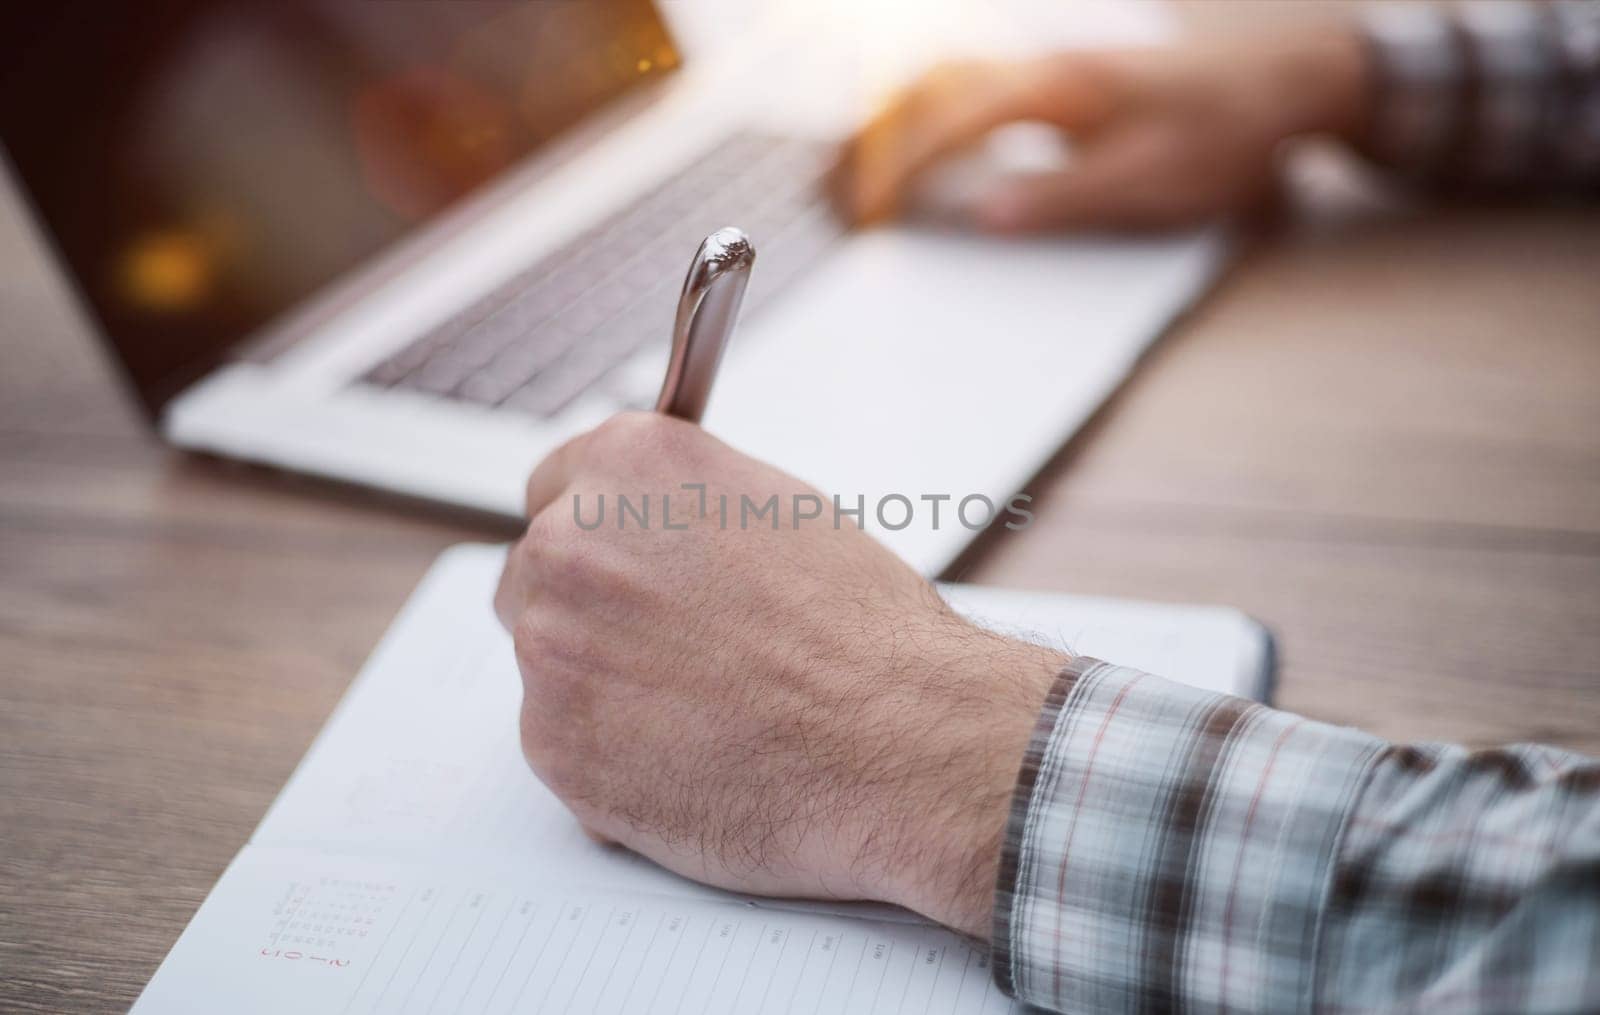 Hands writes a pen in a notebook, computer keyboard in background